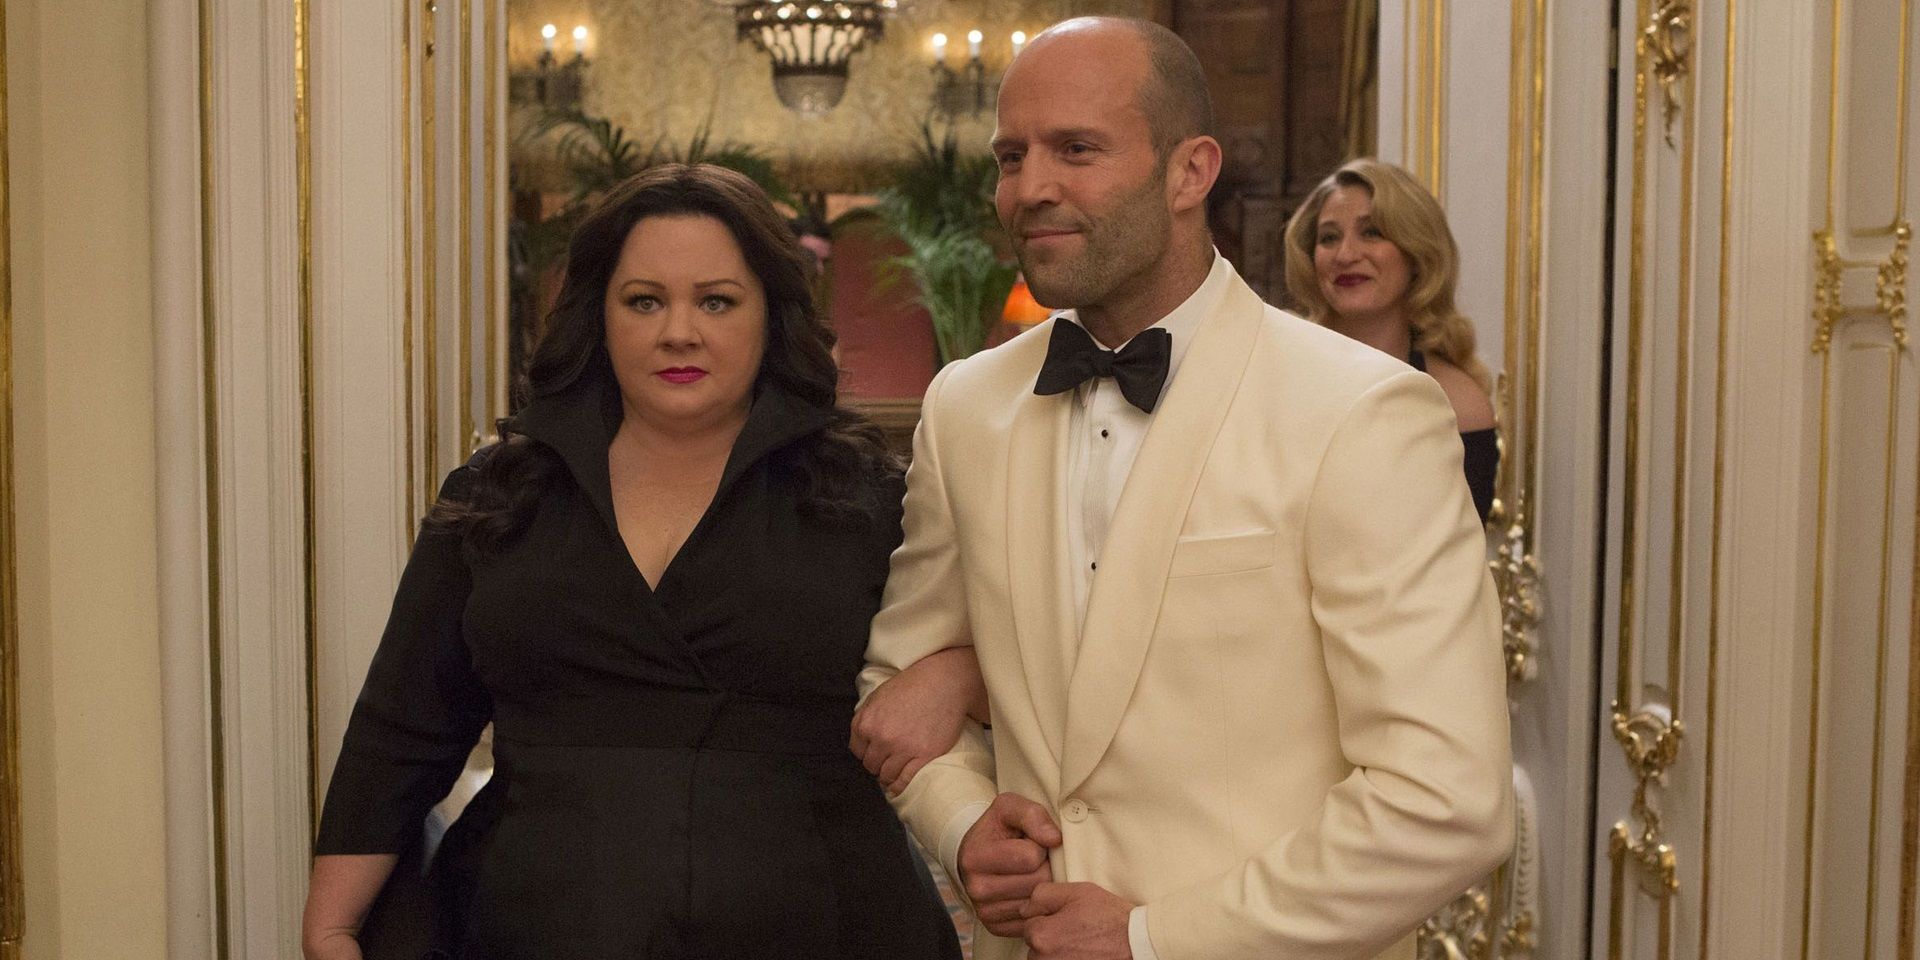 Melissa McCarthy and Jason Statham link arms in Spy